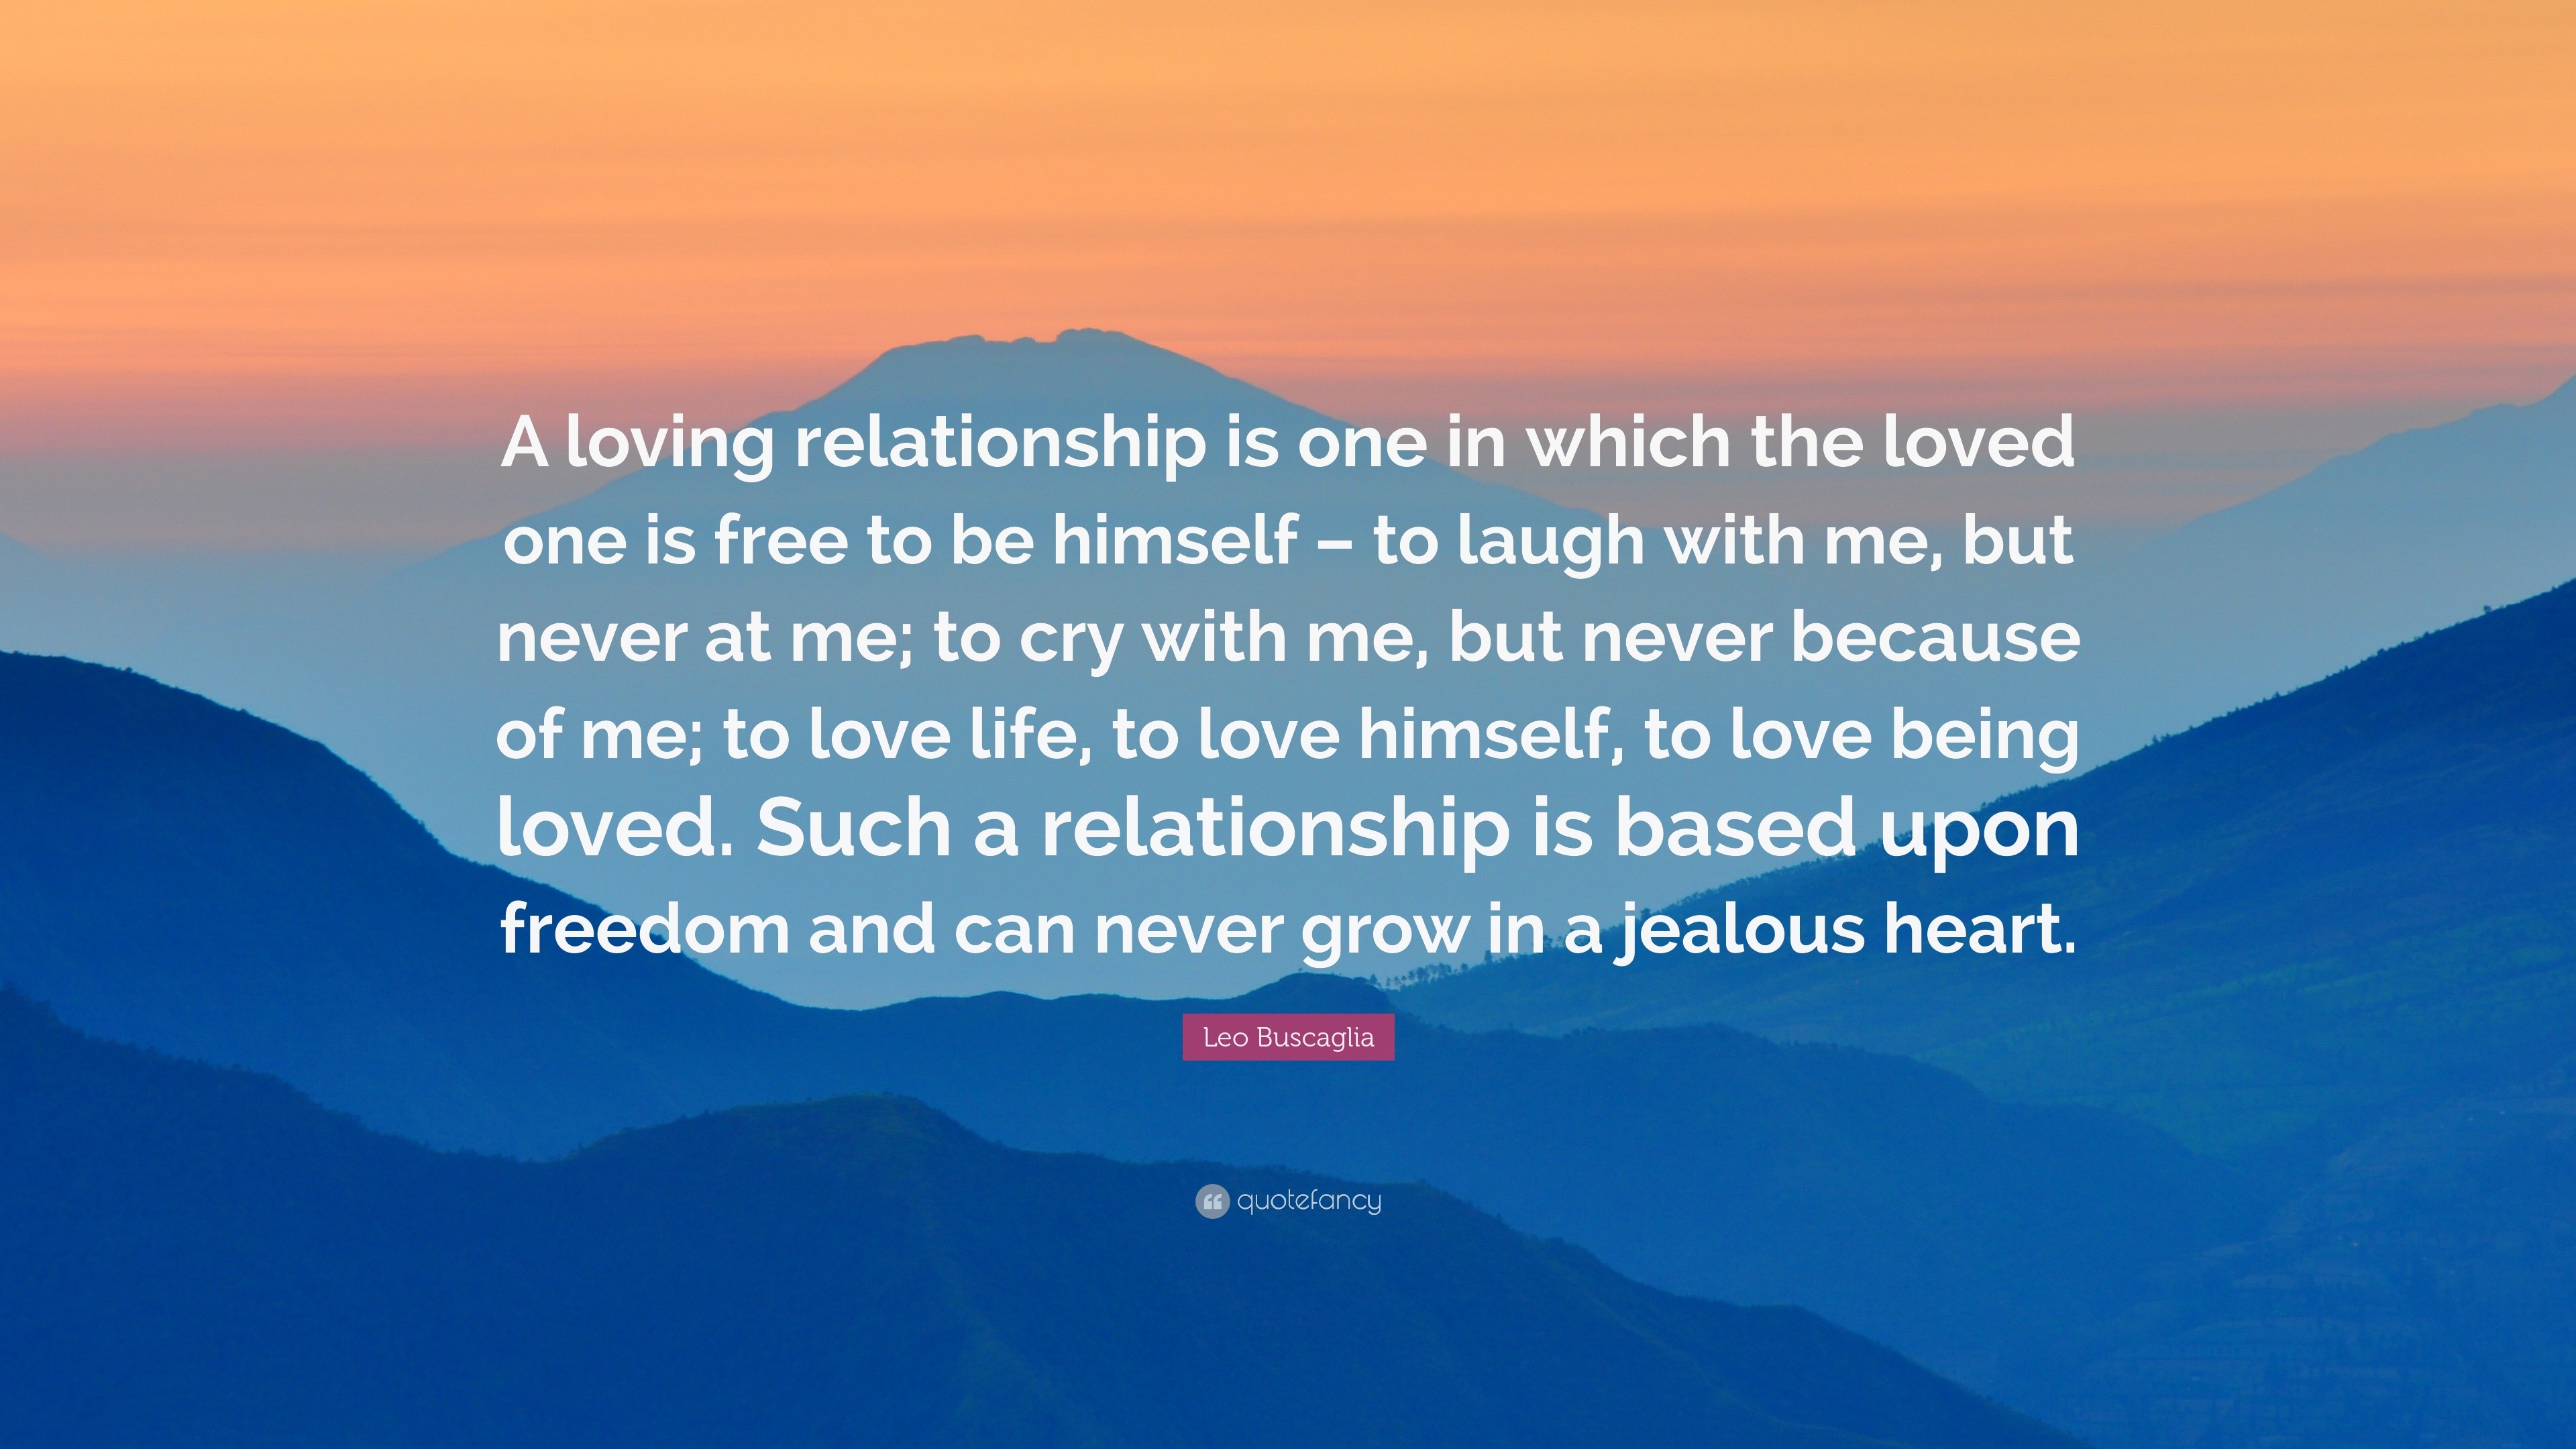 Leo Buscaglia Quote “A loving relationship is one in which the loved one is